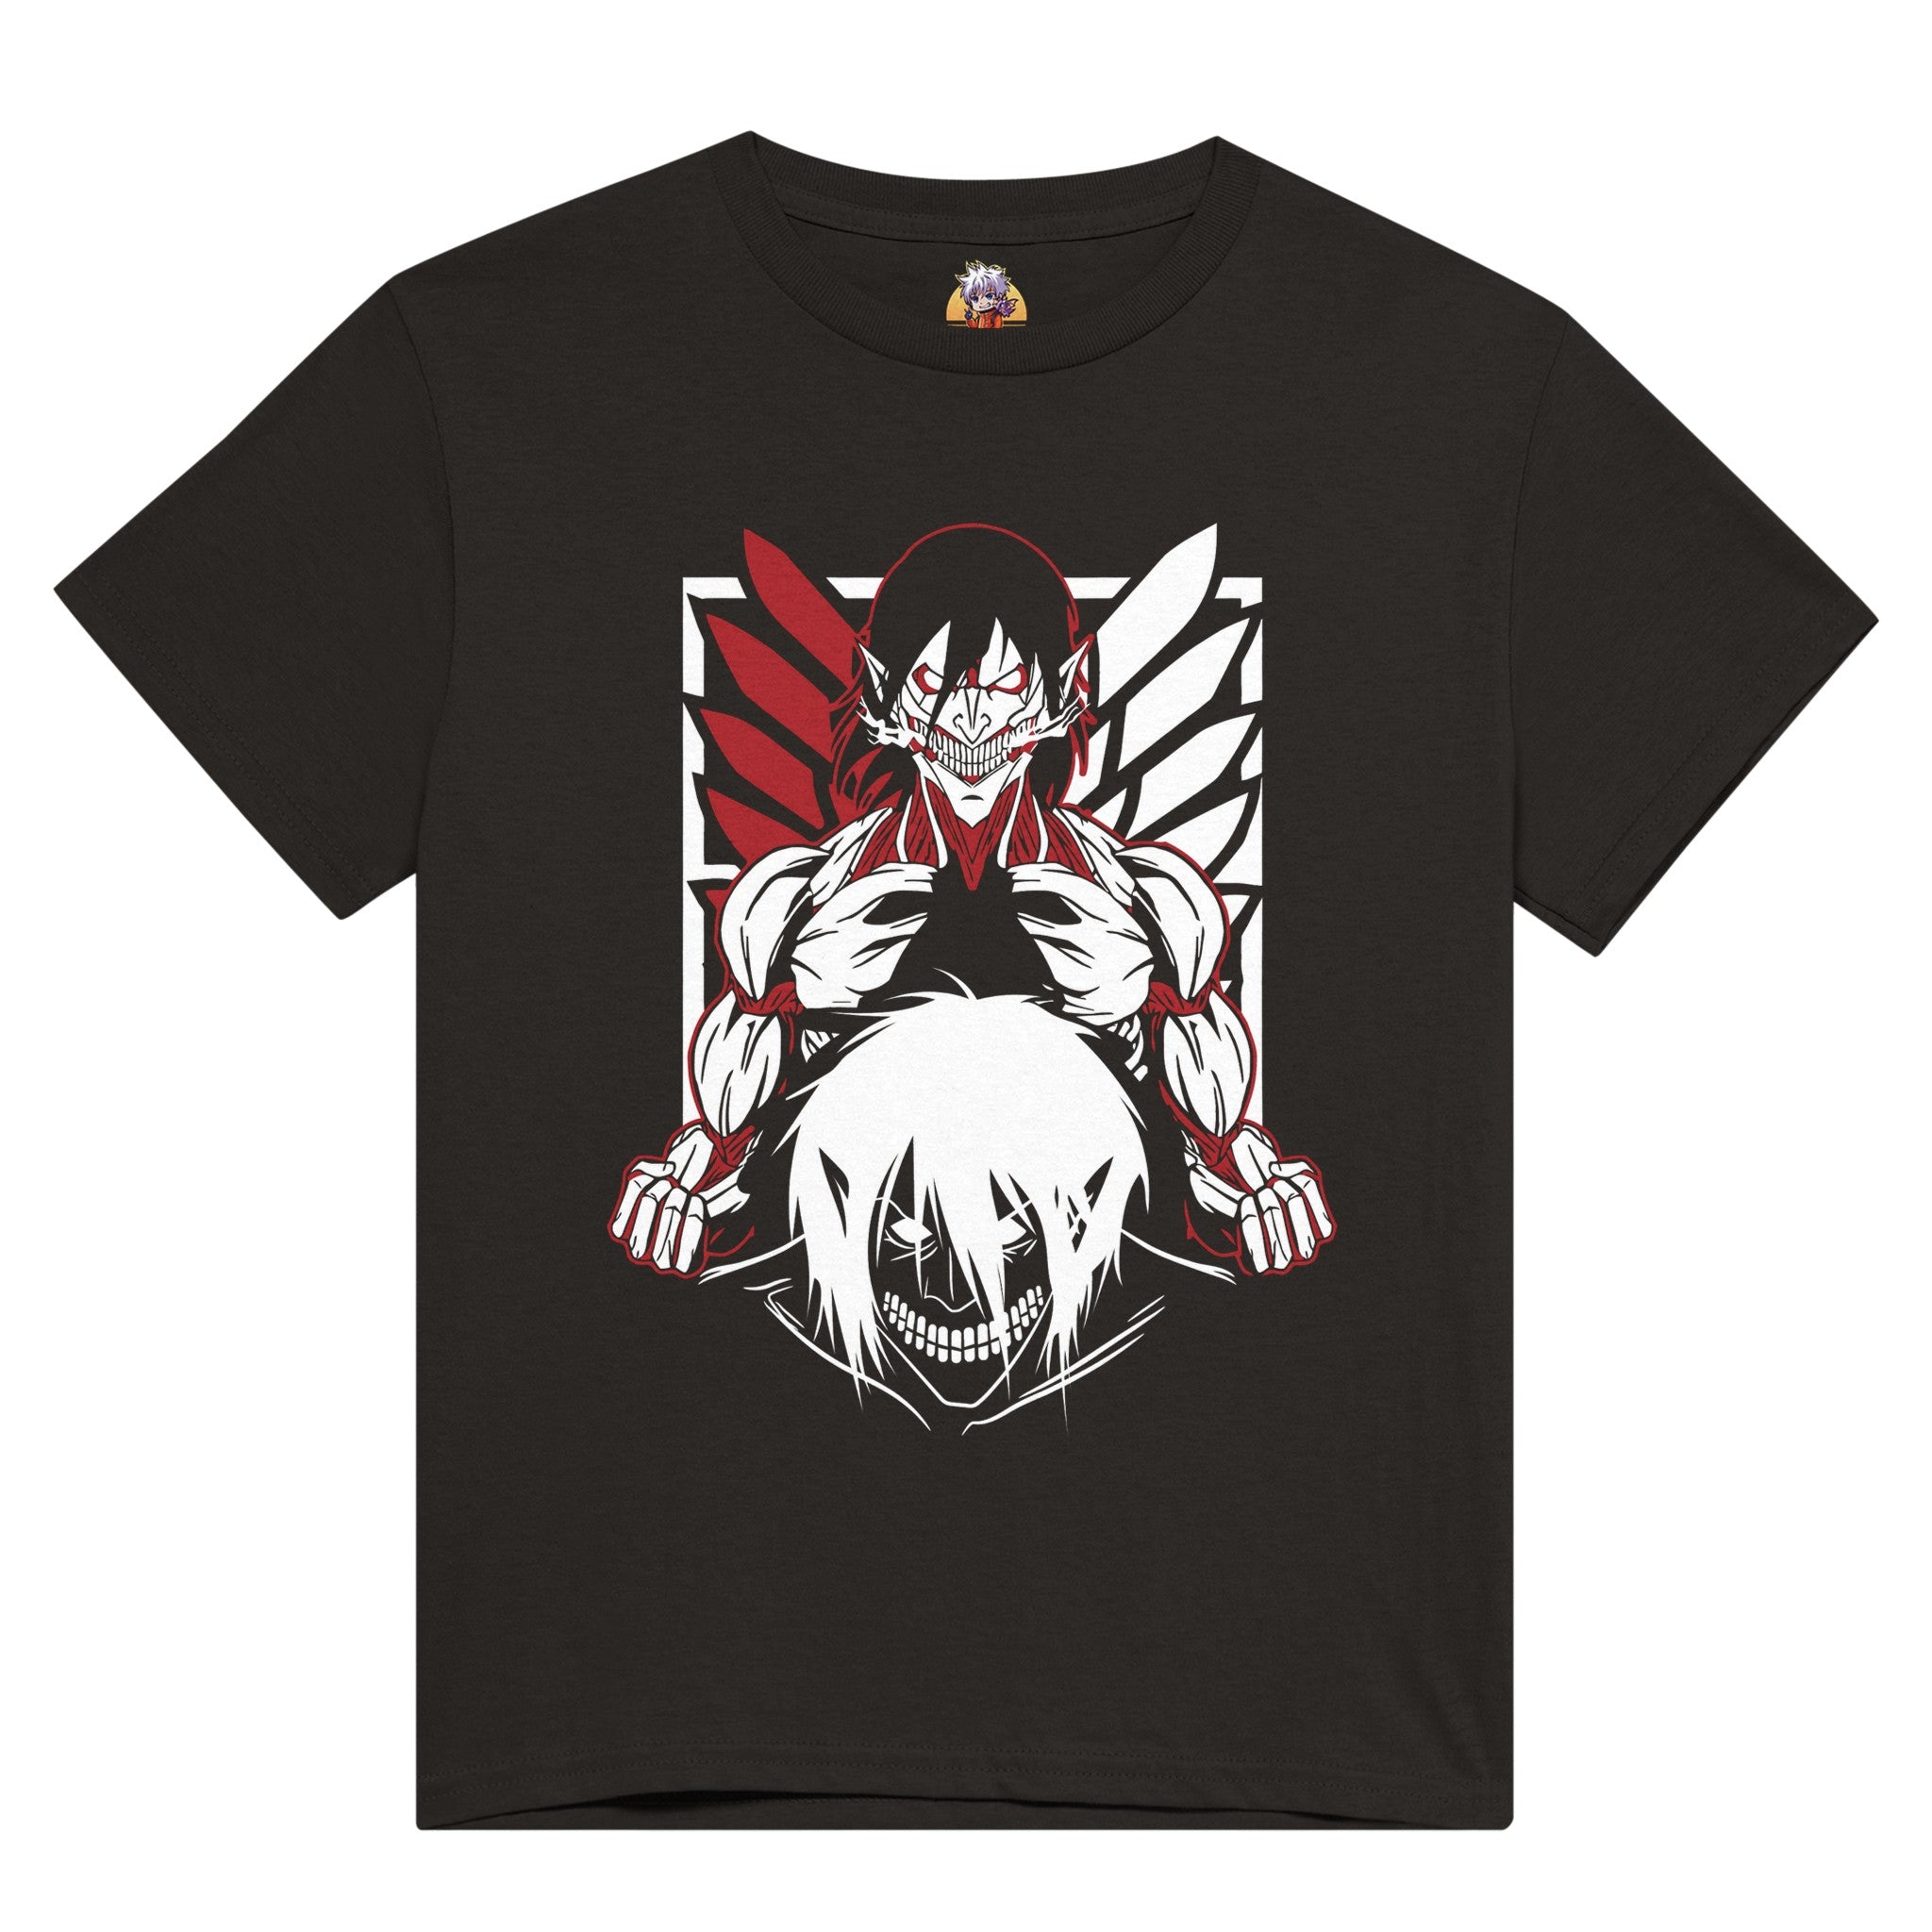 shop and buy attack on titan anime clothing erens titan t-shirt